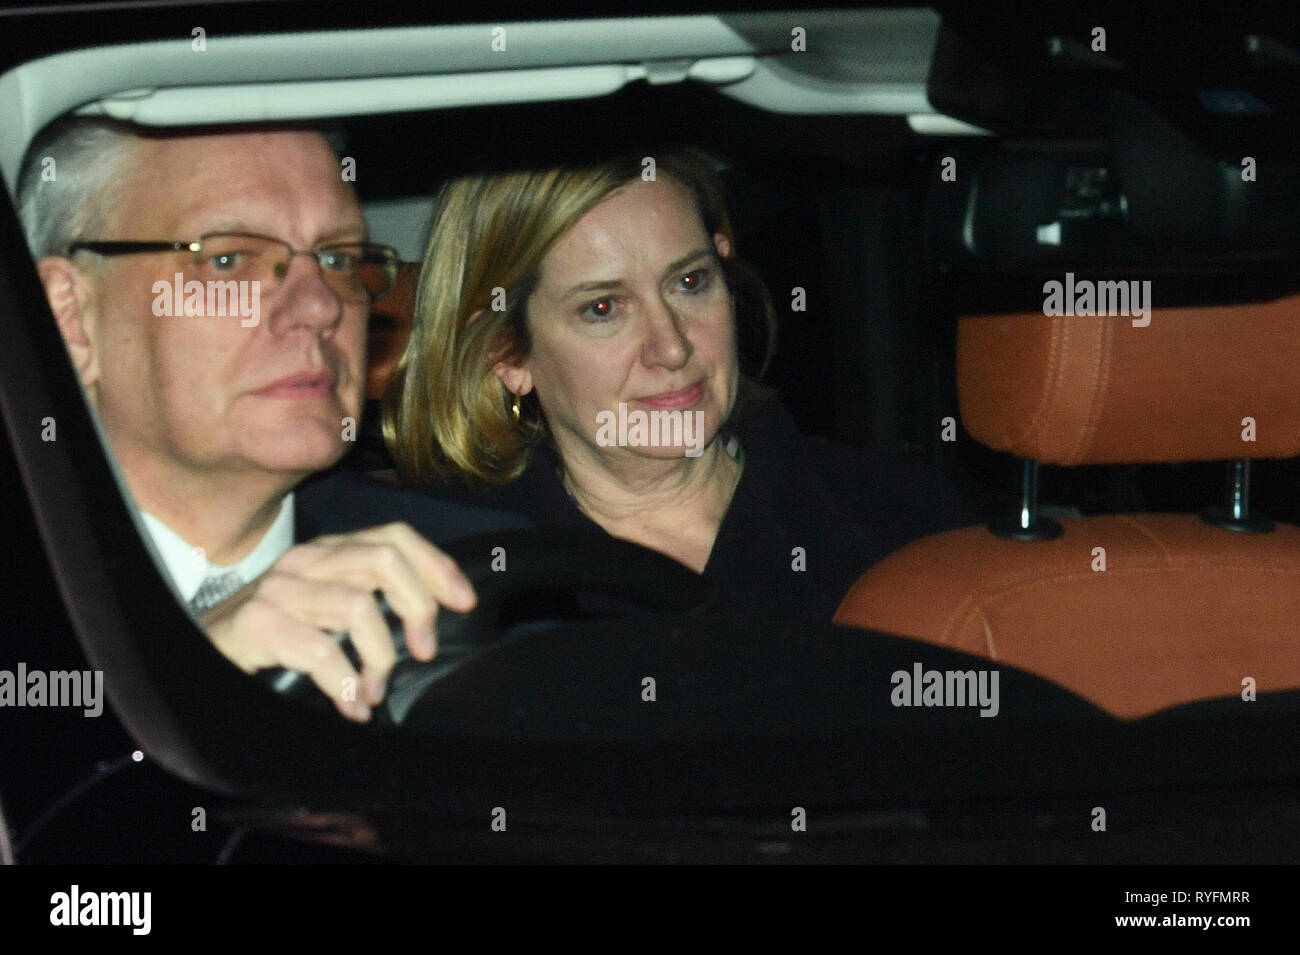 Works and Pensions Secretary Amber Rudd leaving the Houses of Parliament in Westminster, London after MPs have supported the amended Government motion which rejects a no-deal Brexit at any time and under any circumstances by 321 votes to 278, majority 43. Stock Photo